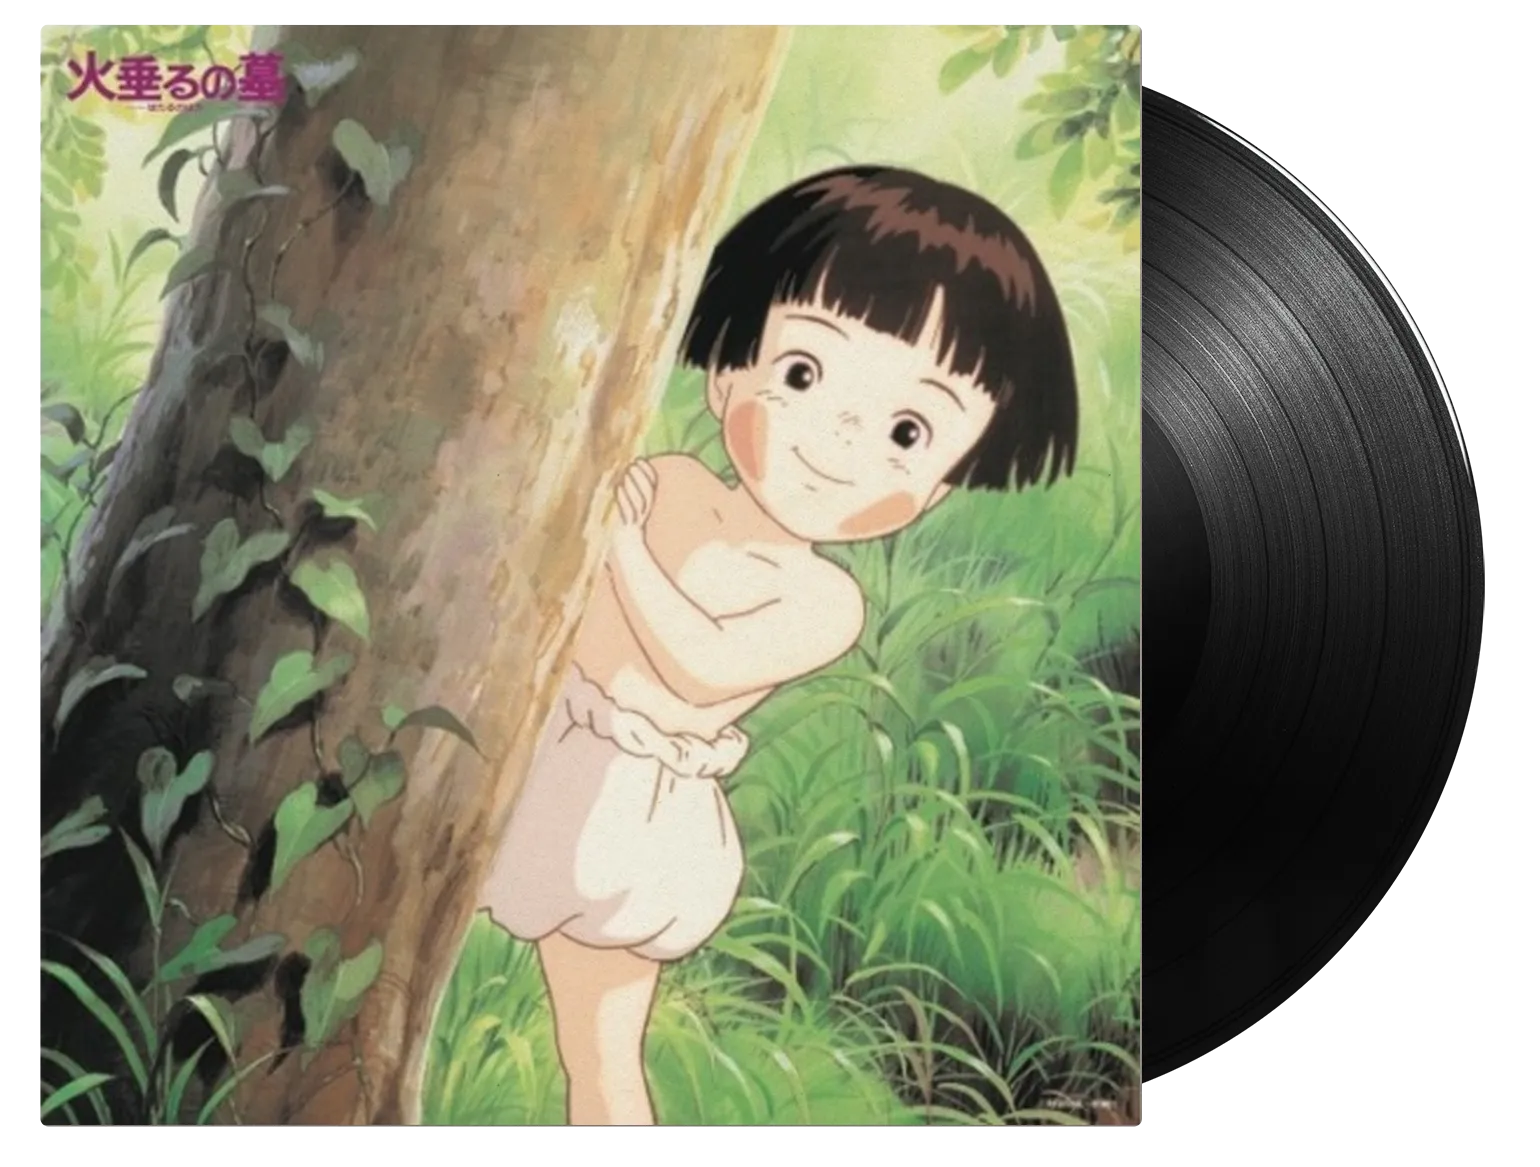 Michio Mamiya - Grave Of The Fireflies Soundtrack - Reviews